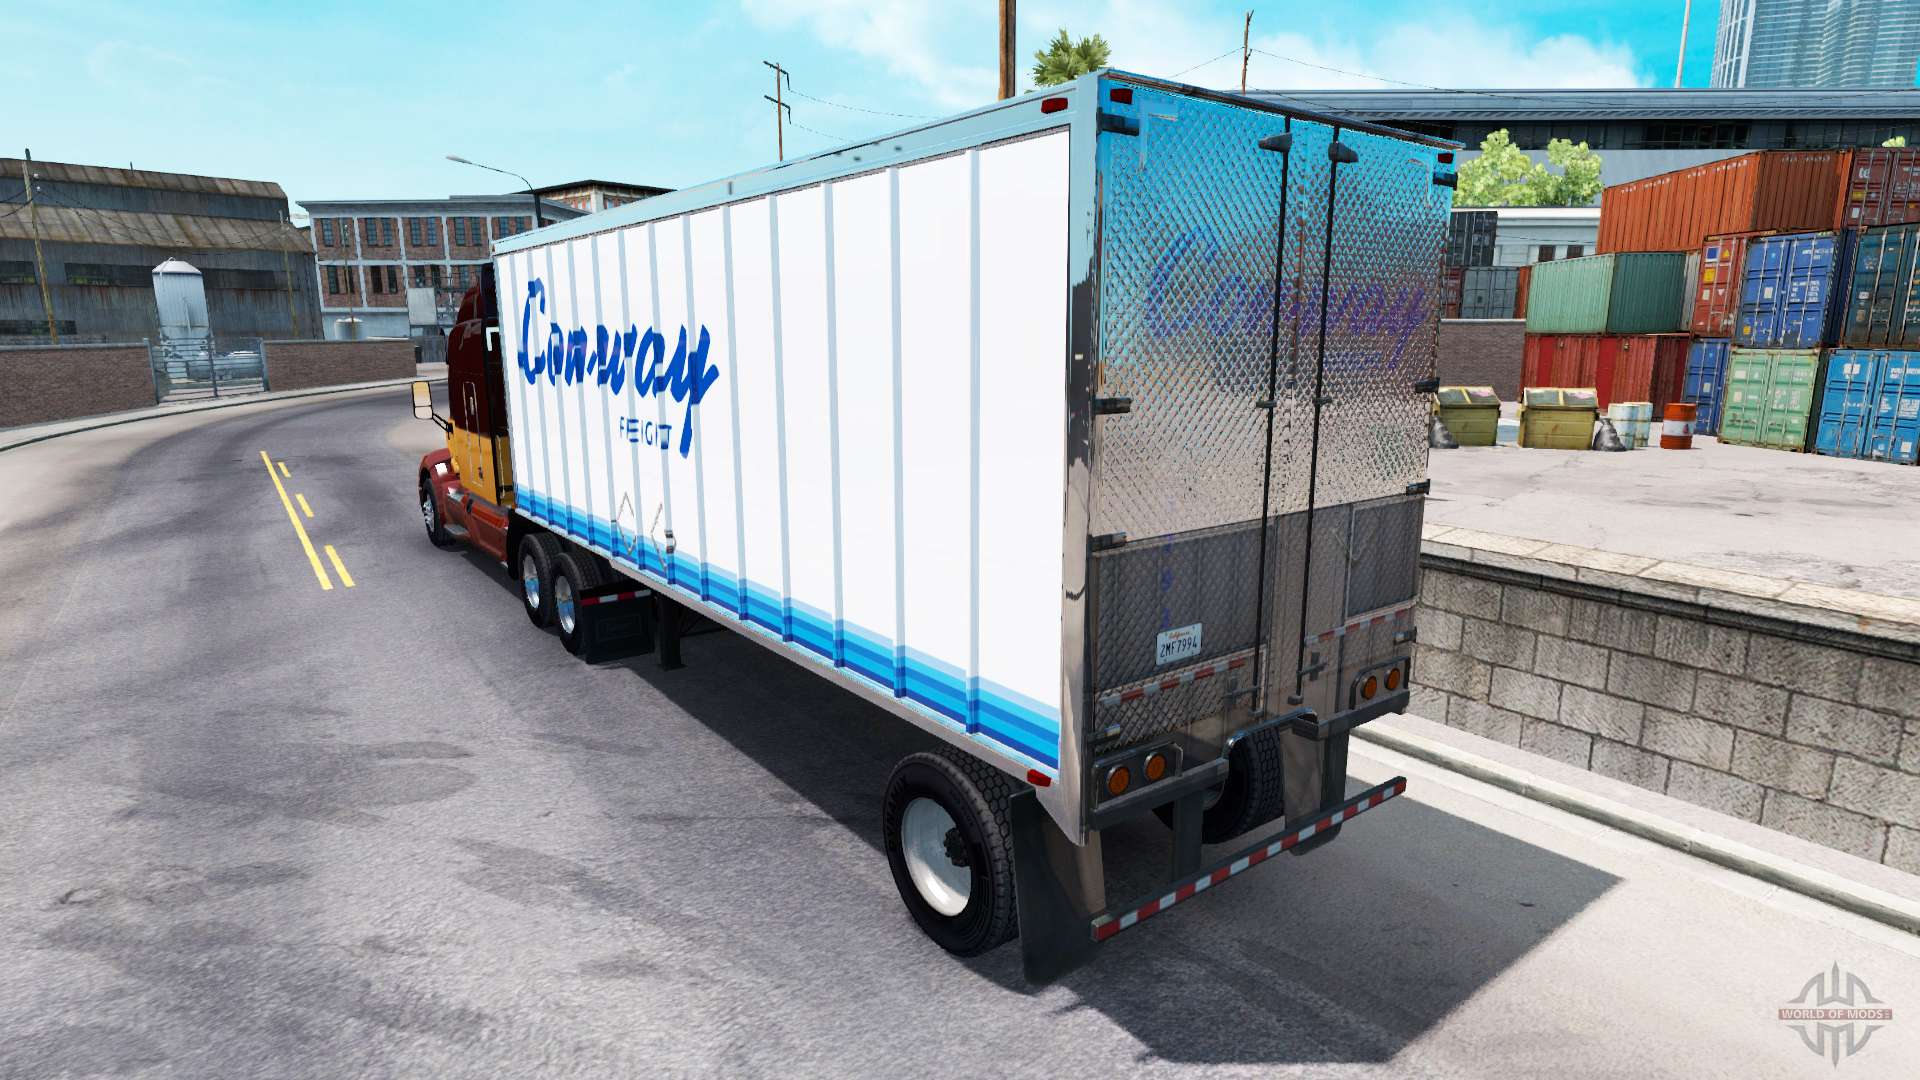 Skin for ConWay trailer for American Truck Simulator